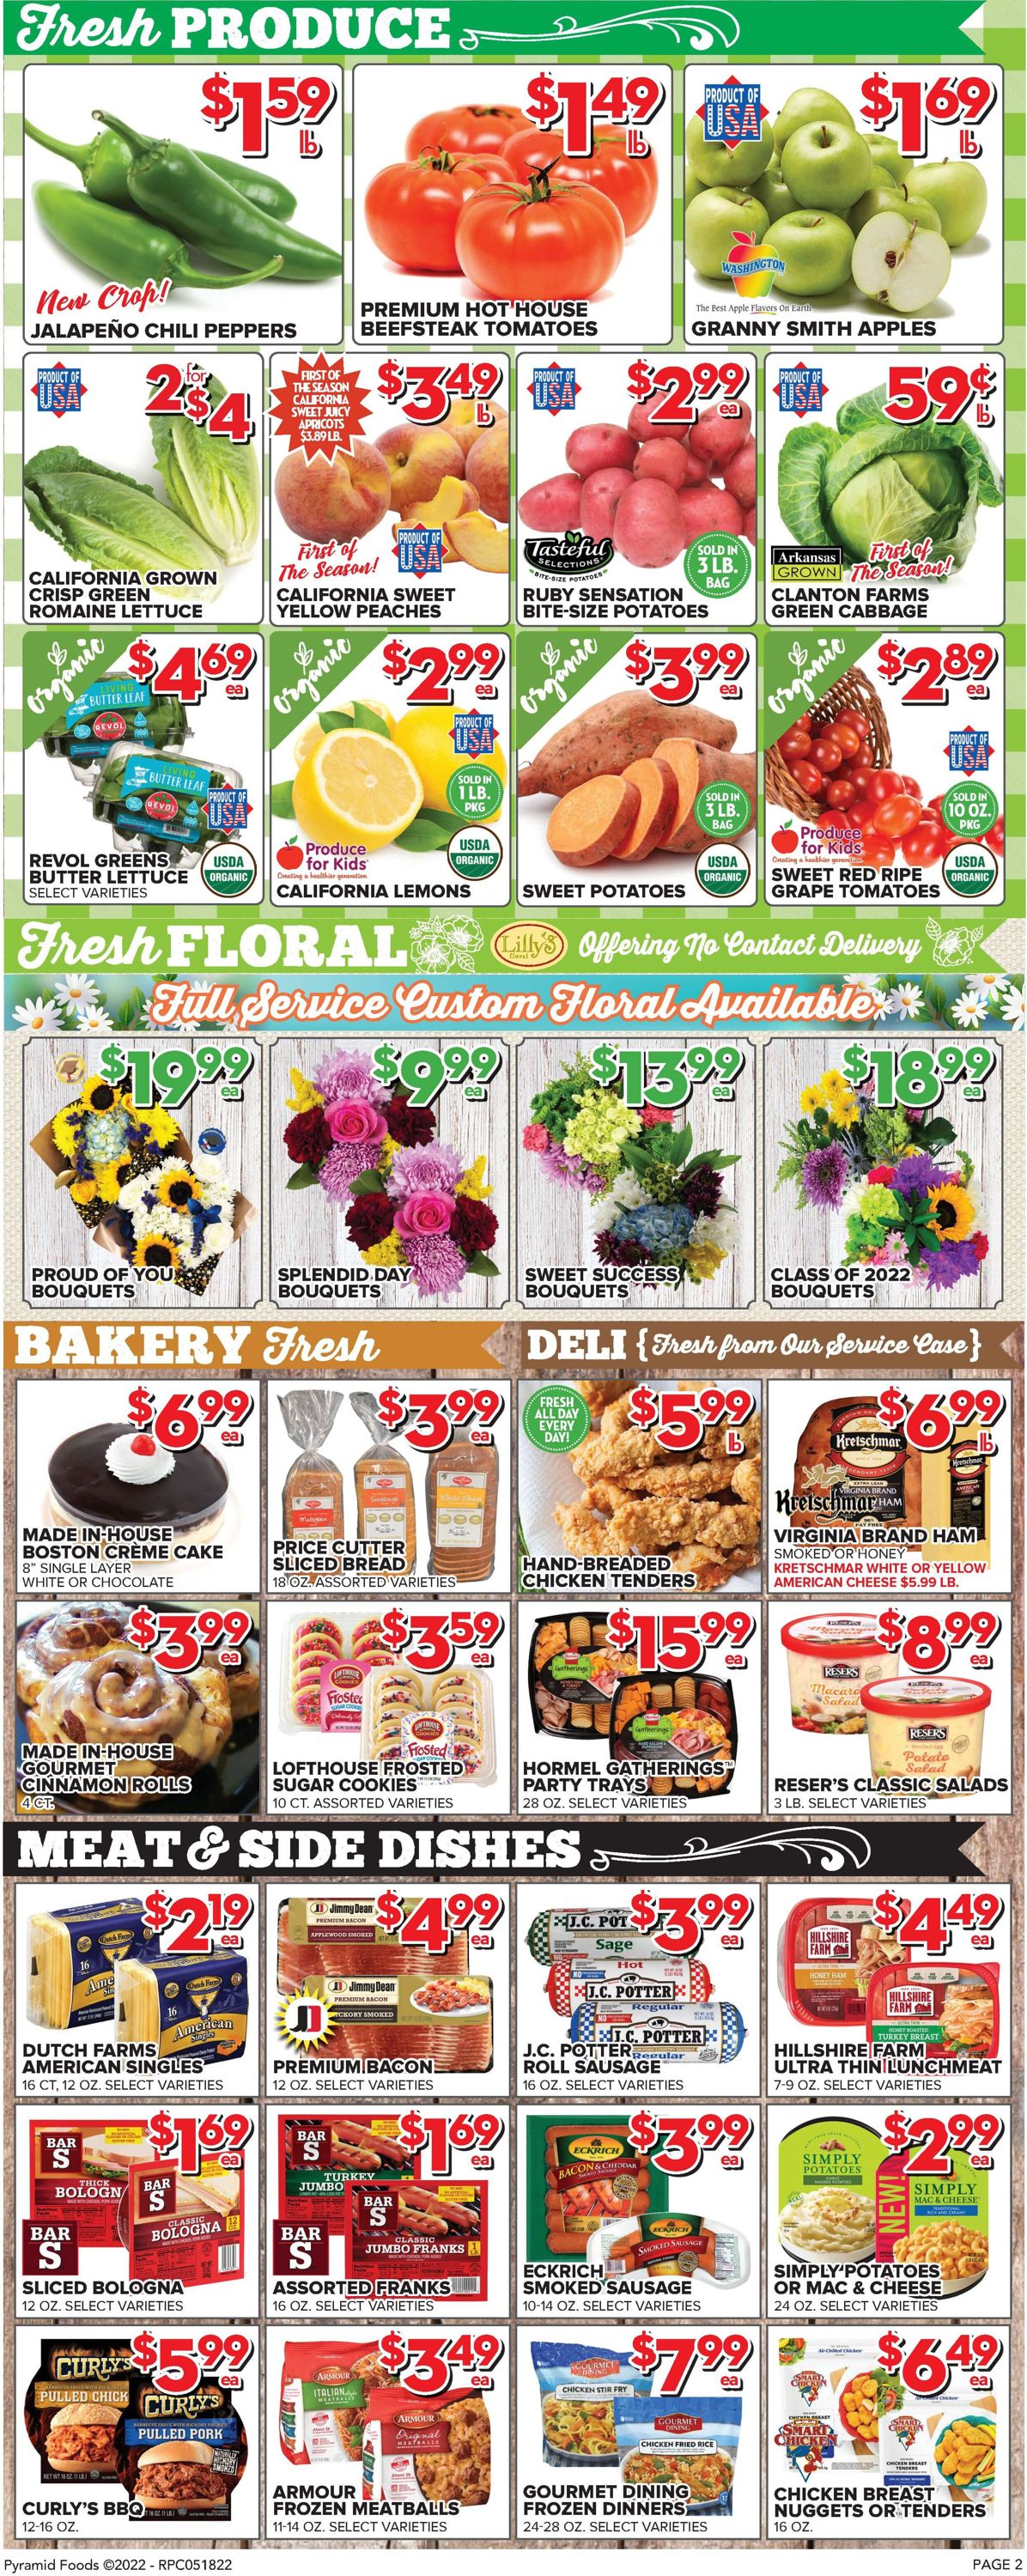 Price Cutter Weekly Ad Circular - valid 05/18-05/24/2022 (Page 2)